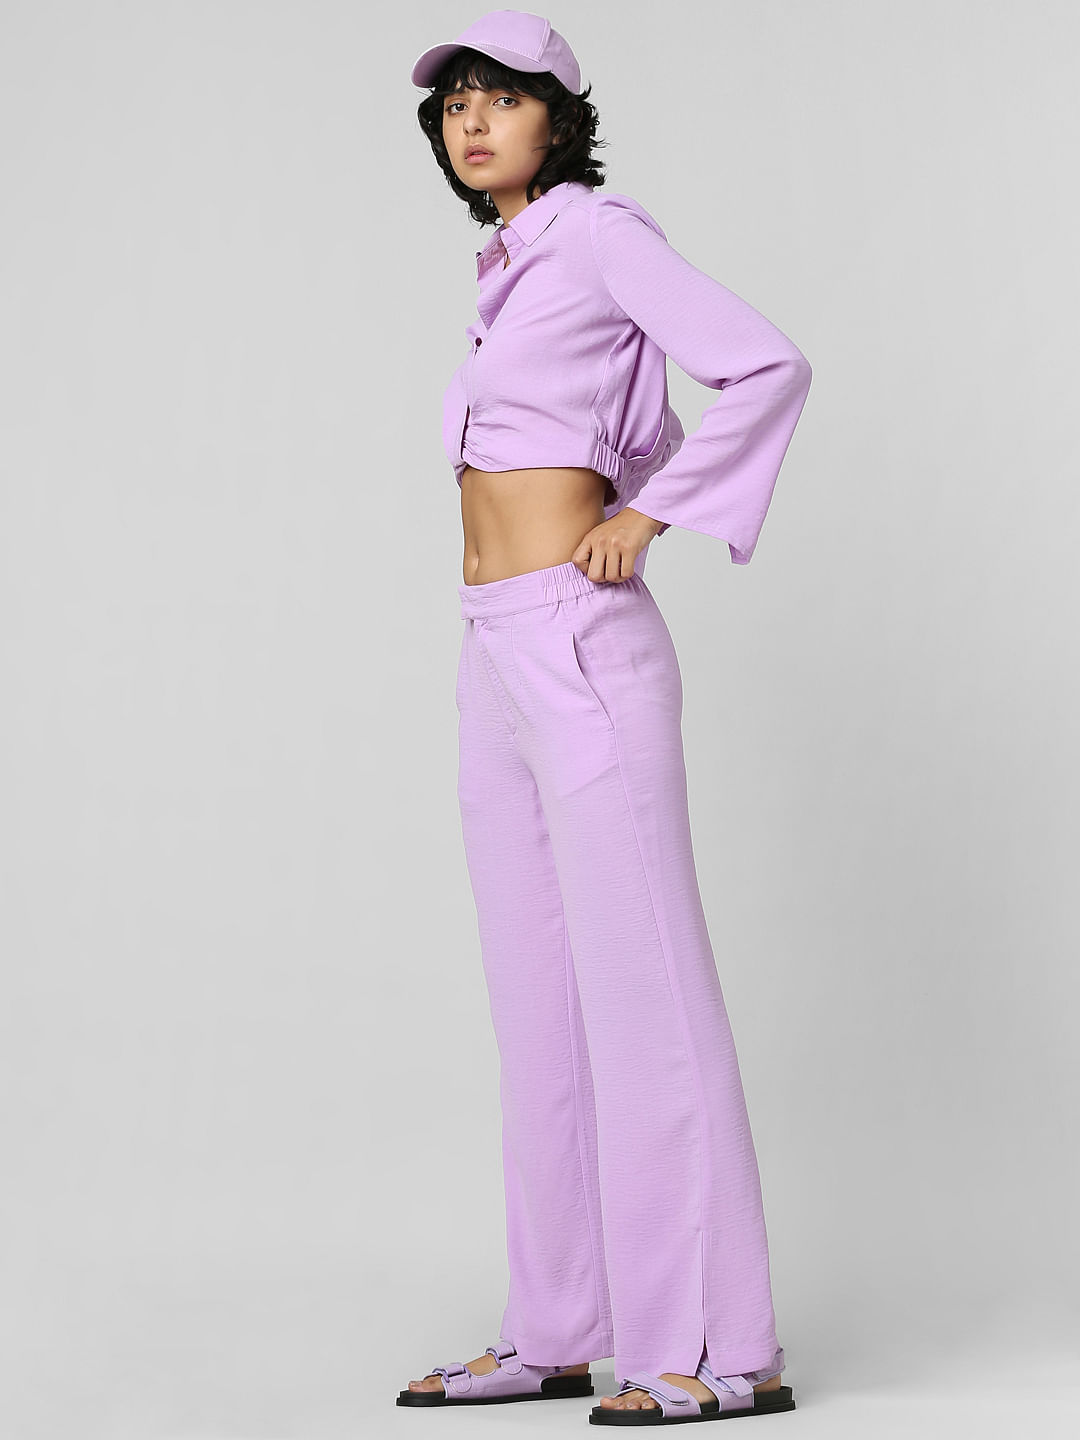 ZARA WOMAN New With Tag HIGH-WAISTED PANTS TROUSERS Lilac Purple XS 💜 |  eBay